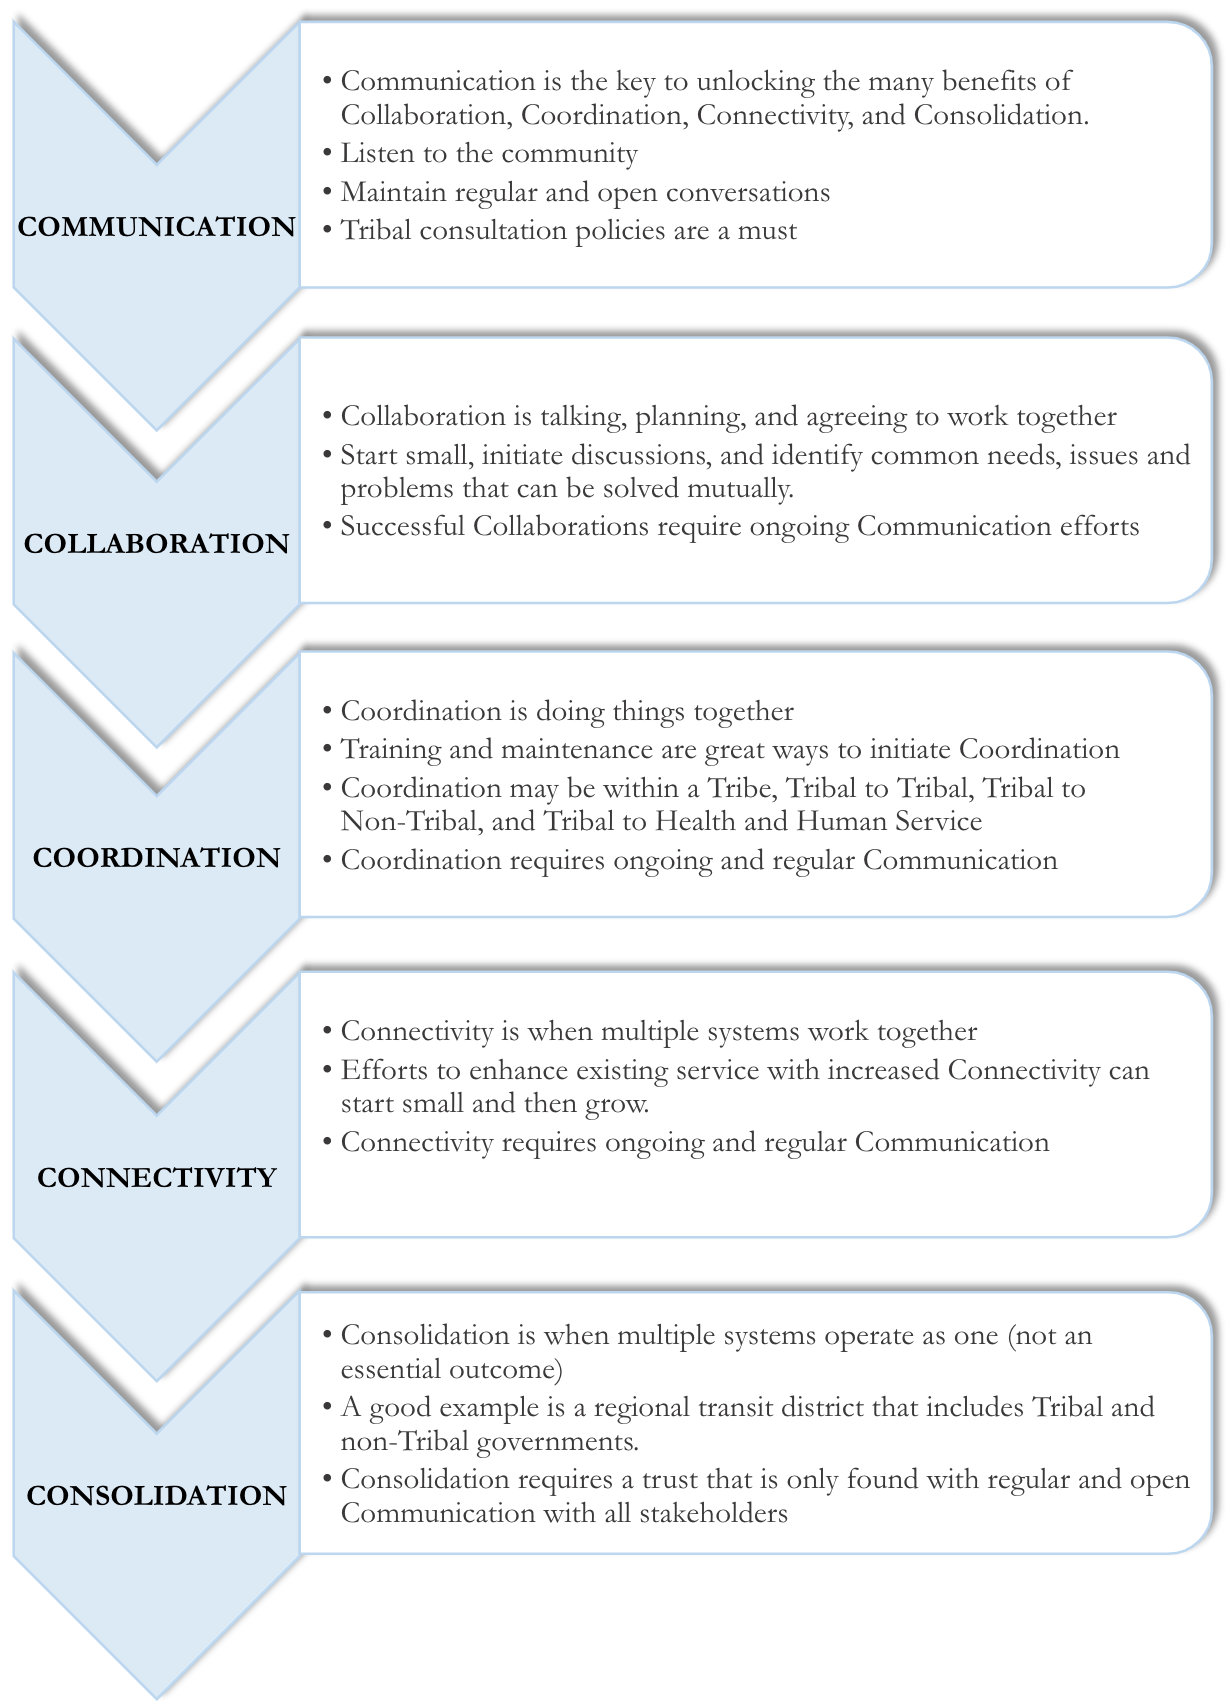 The 5 C’s: Communication, Collaboration, Coordination, Connectivity, and Consolidation